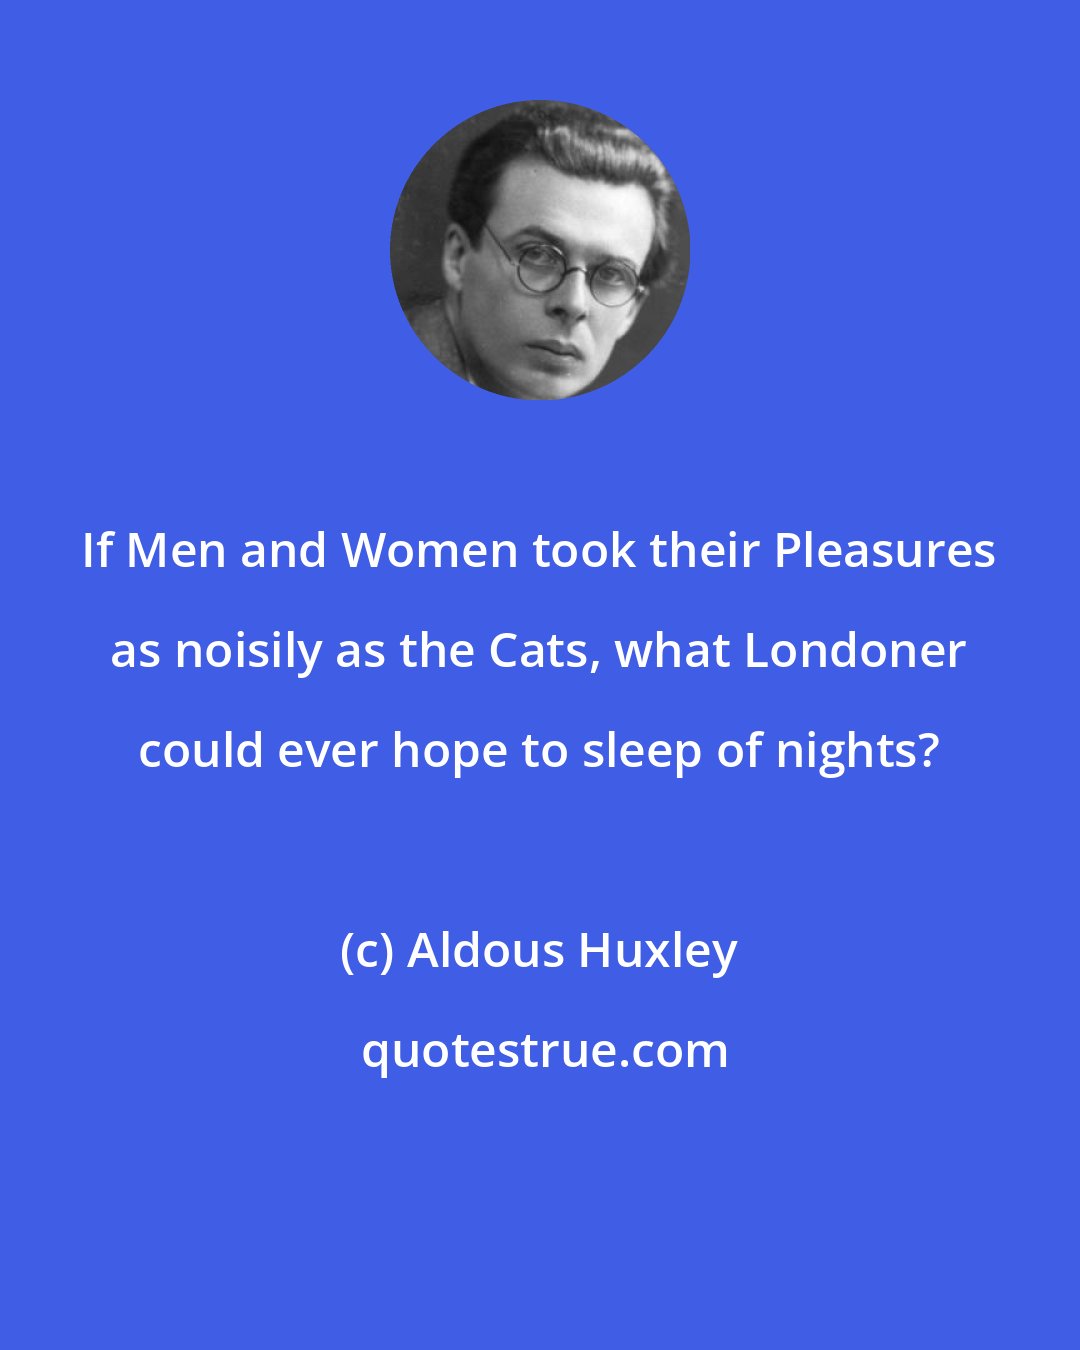 Aldous Huxley: If Men and Women took their Pleasures as noisily as the Cats, what Londoner could ever hope to sleep of nights?